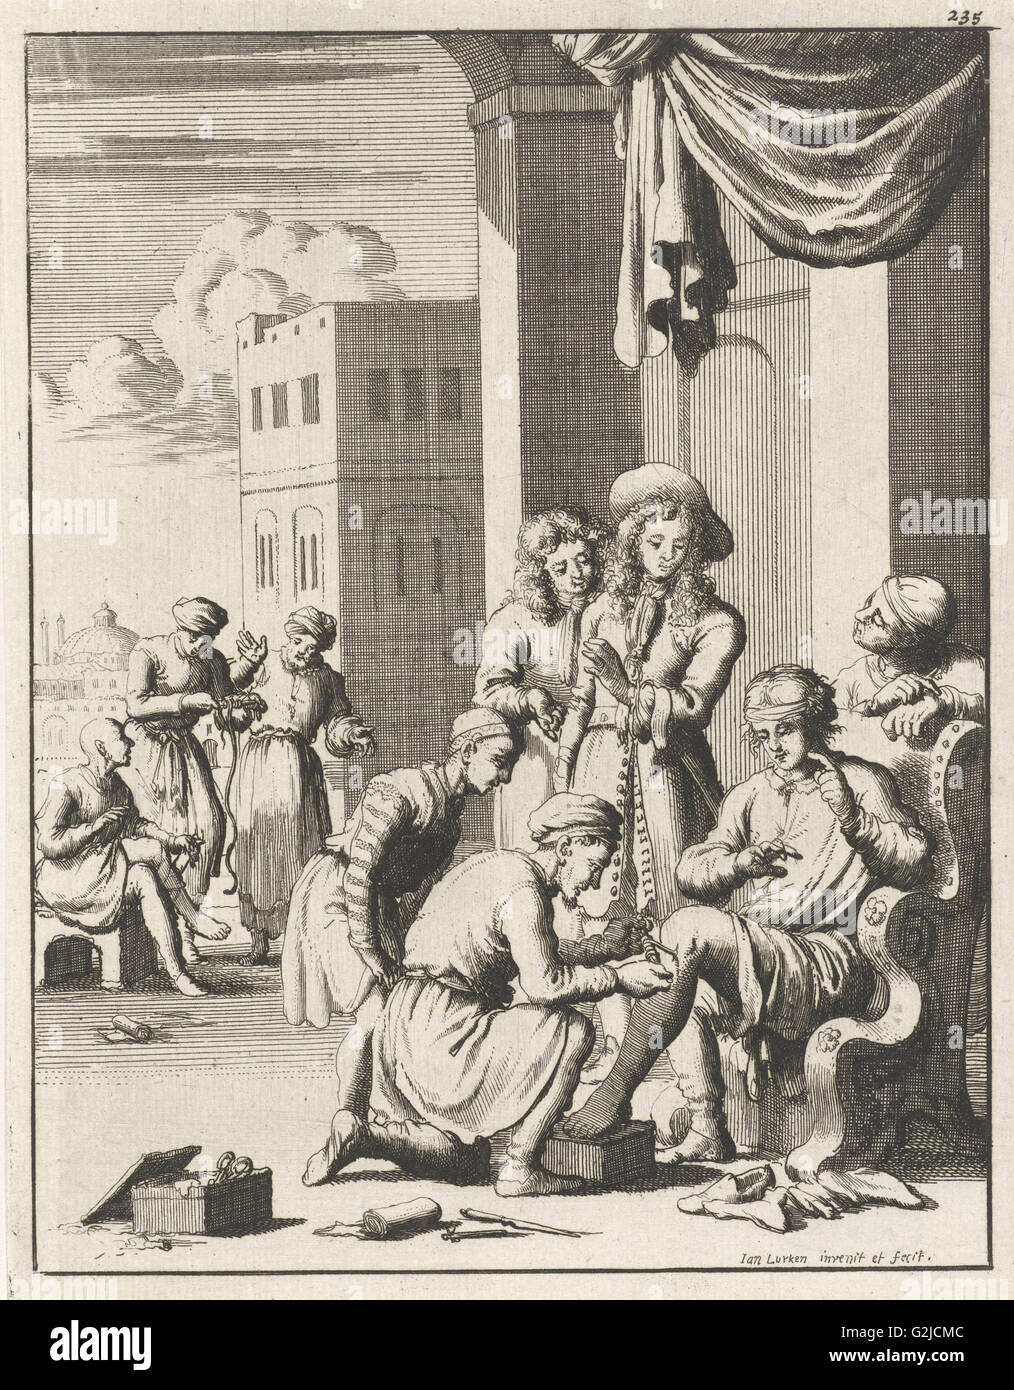 Surgery to remove worms from a leg at Bender Abassi, Jan Luyken, 1682 Stock Photo